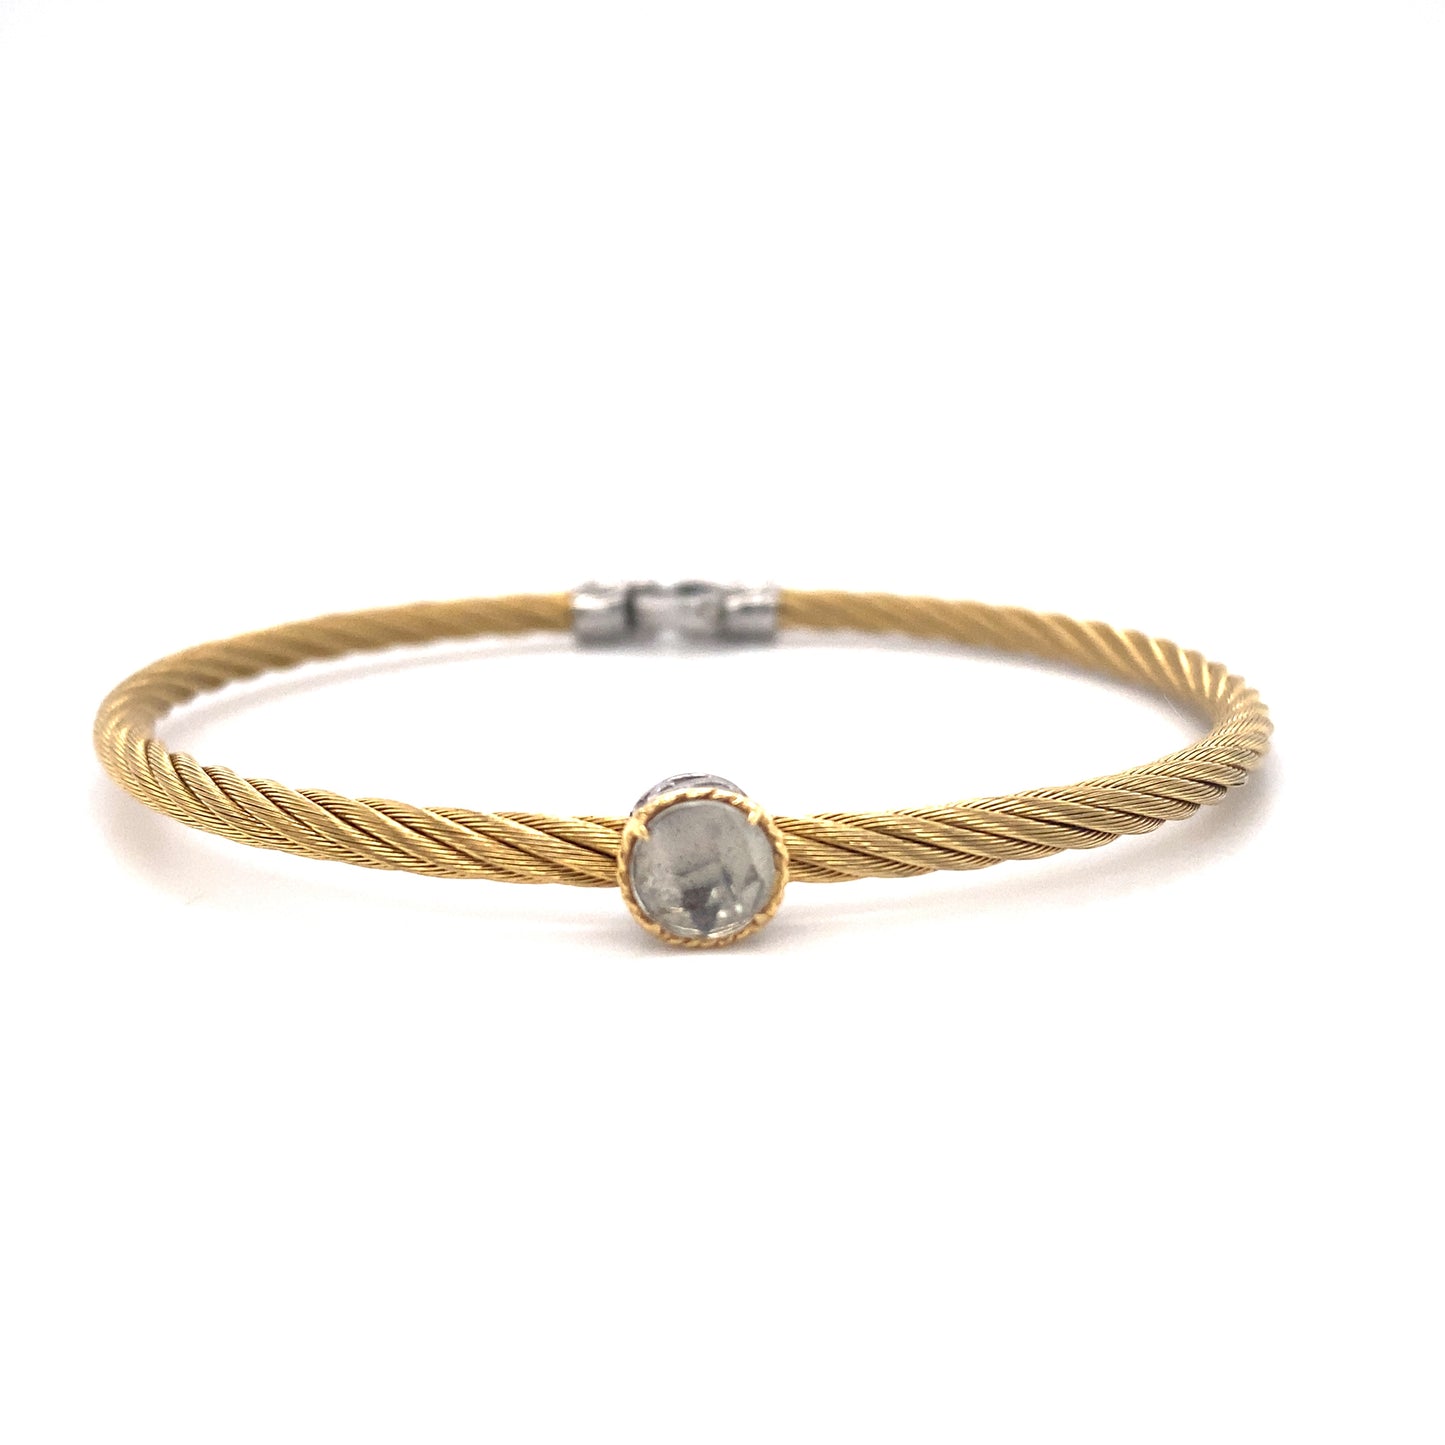 Charriol Bangle Bracelet with Faceted Quartz in Steel and 18K Gold